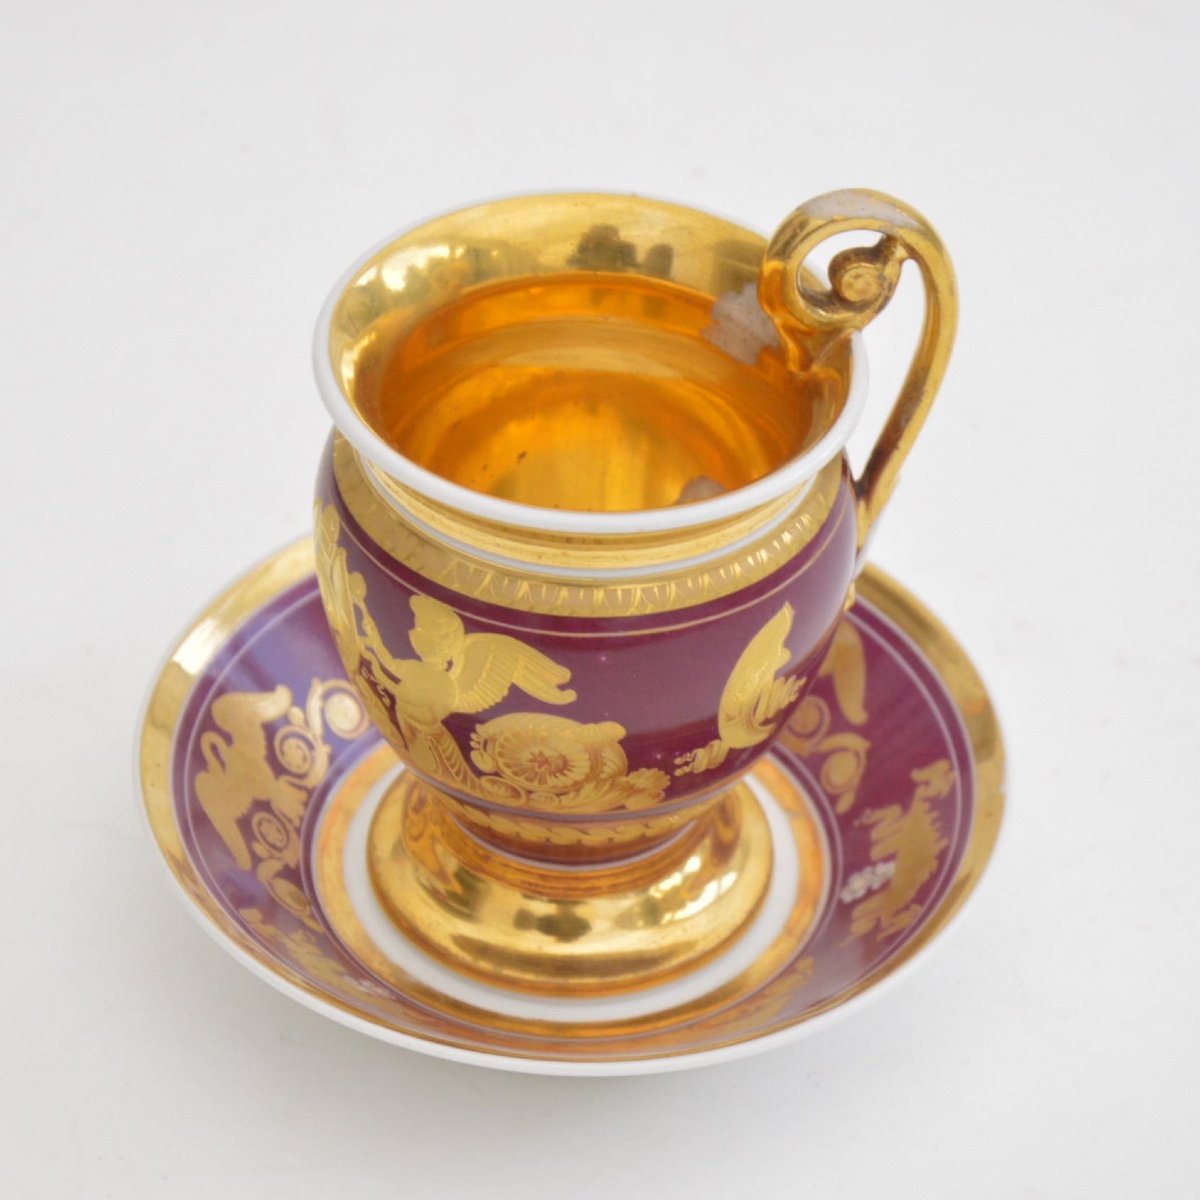 Empire Cup And Saucer In Empire Porcelain With Golden Decor Cherubs, Swans, Circa 1820